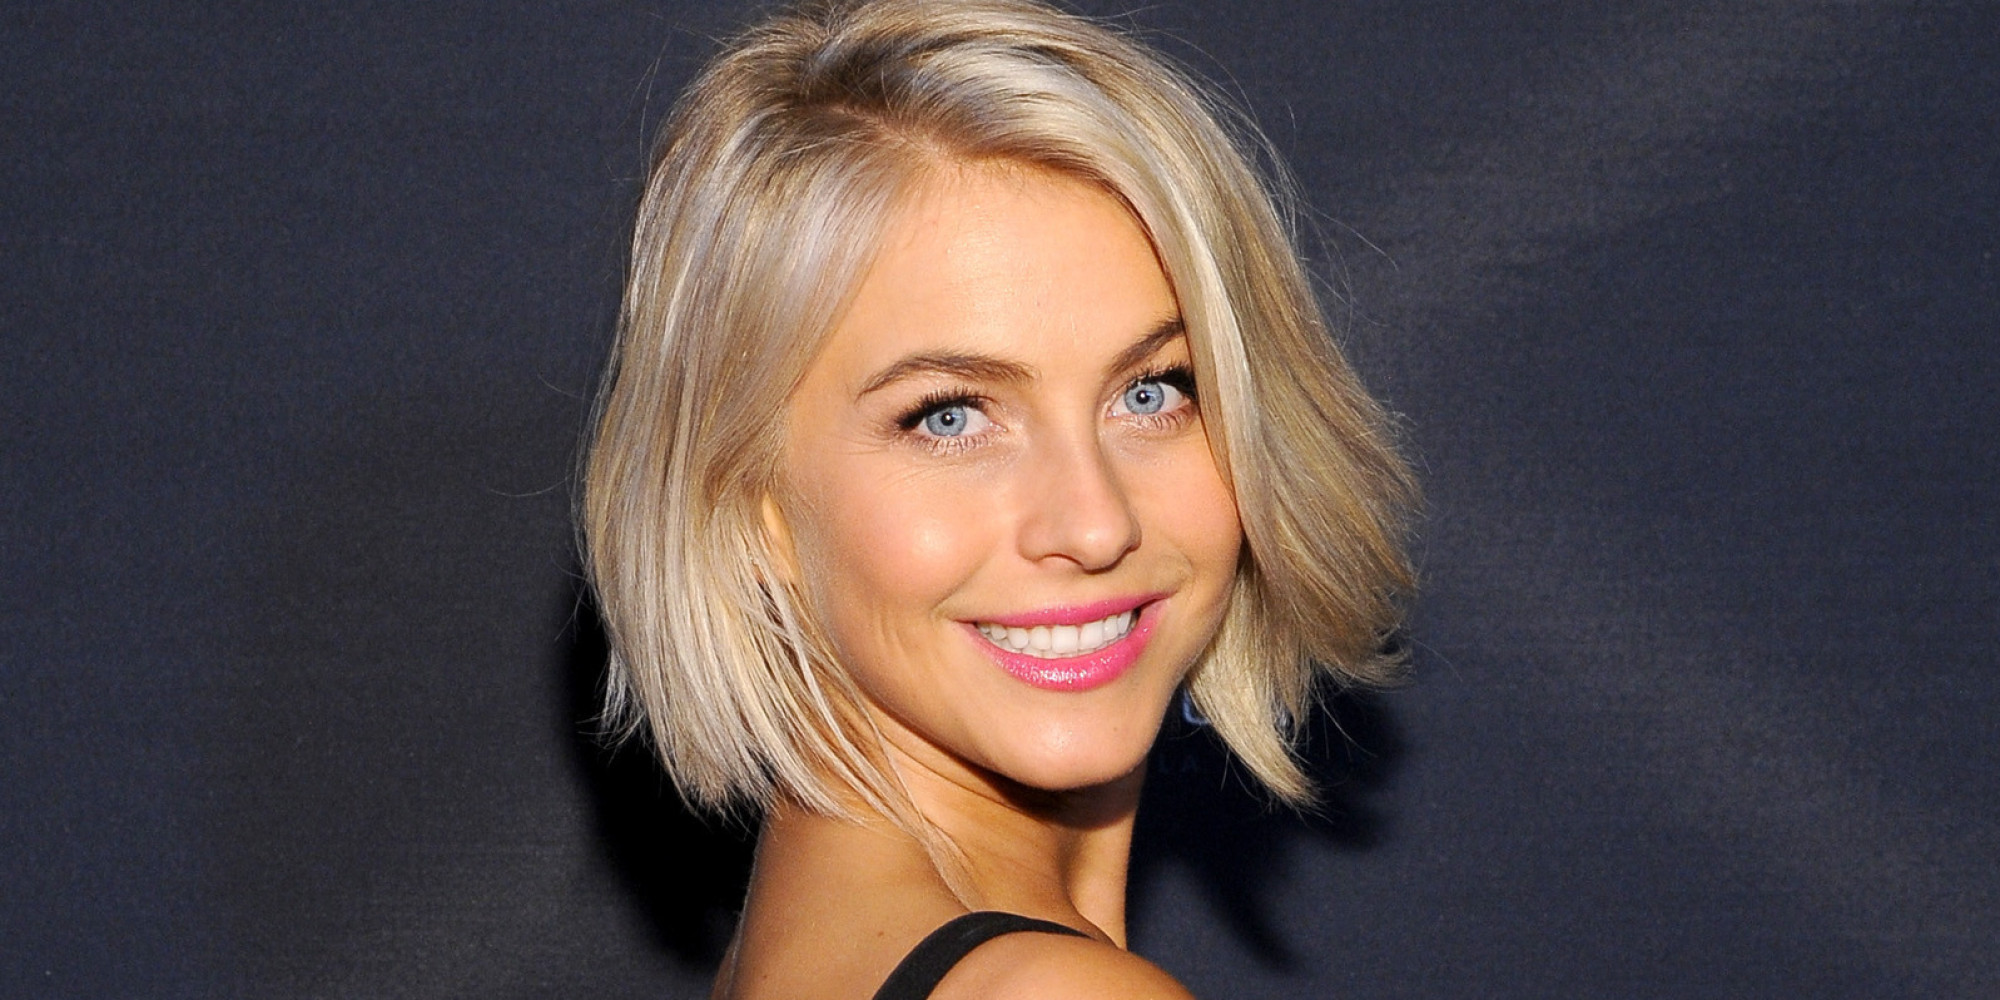 Julianne Hough: Pictures, Videos, Breaking News